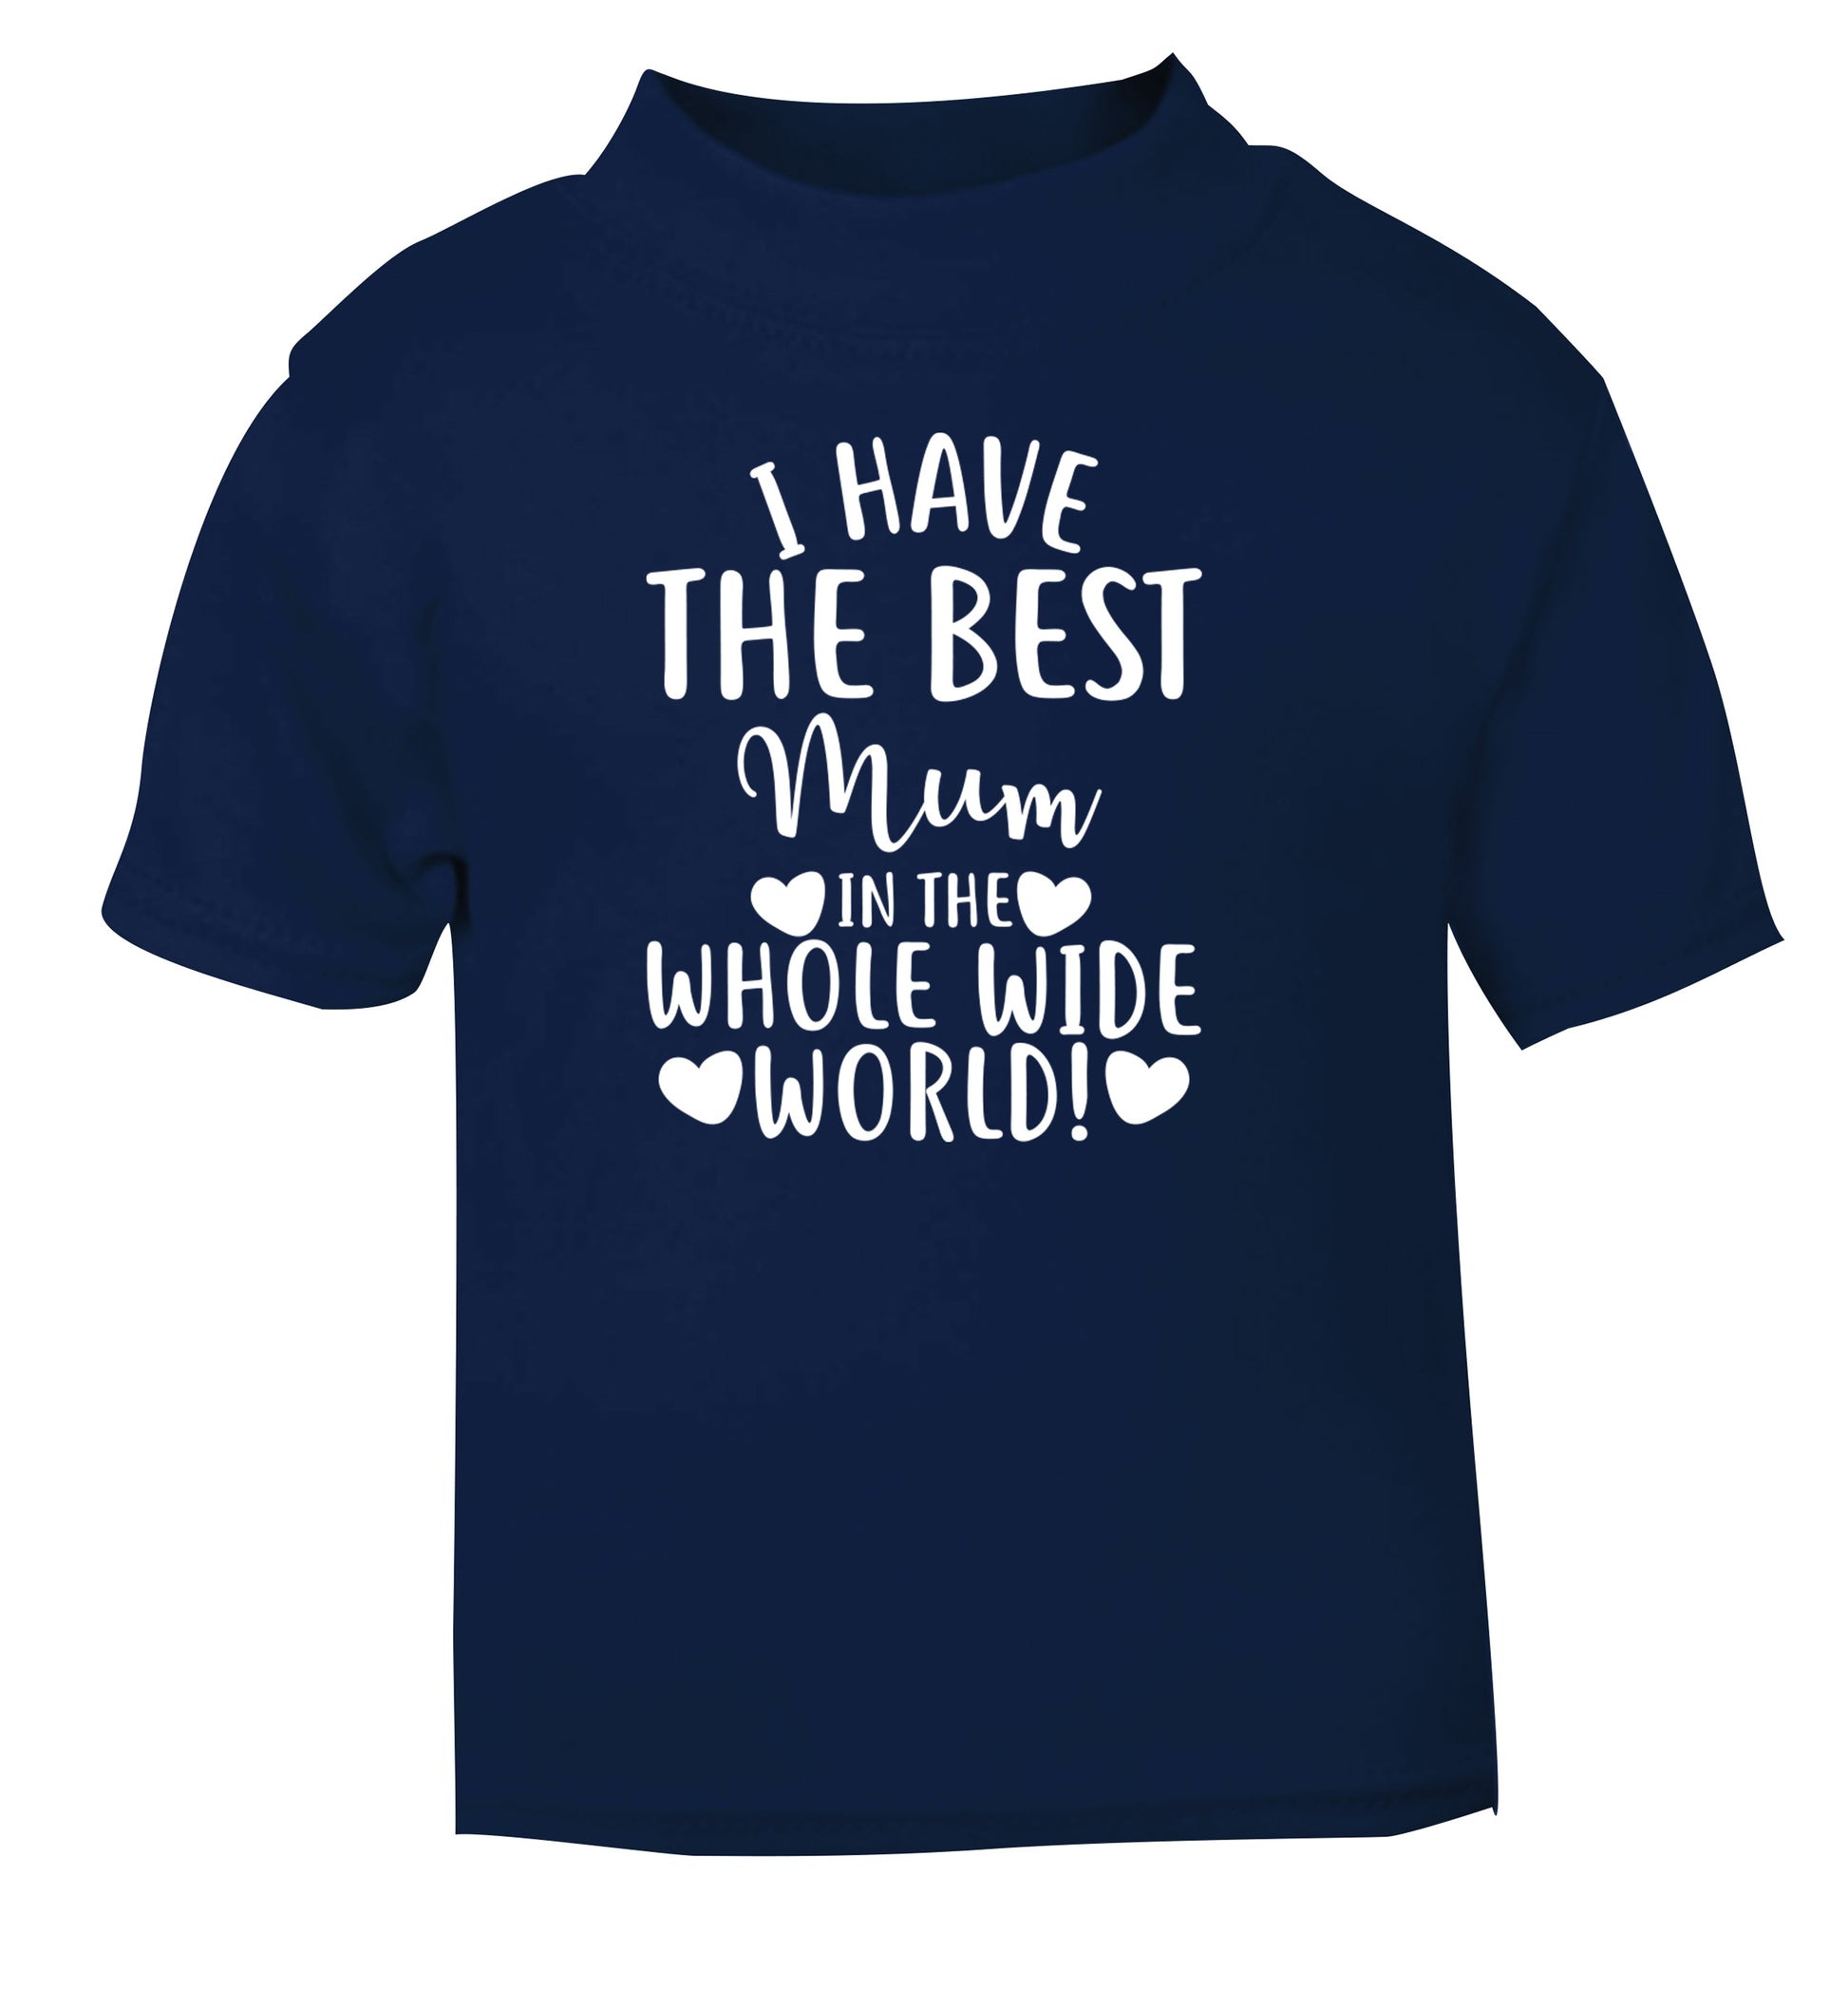 I have the best mum in the whole wide world! navy Baby Toddler Tshirt 2 Years